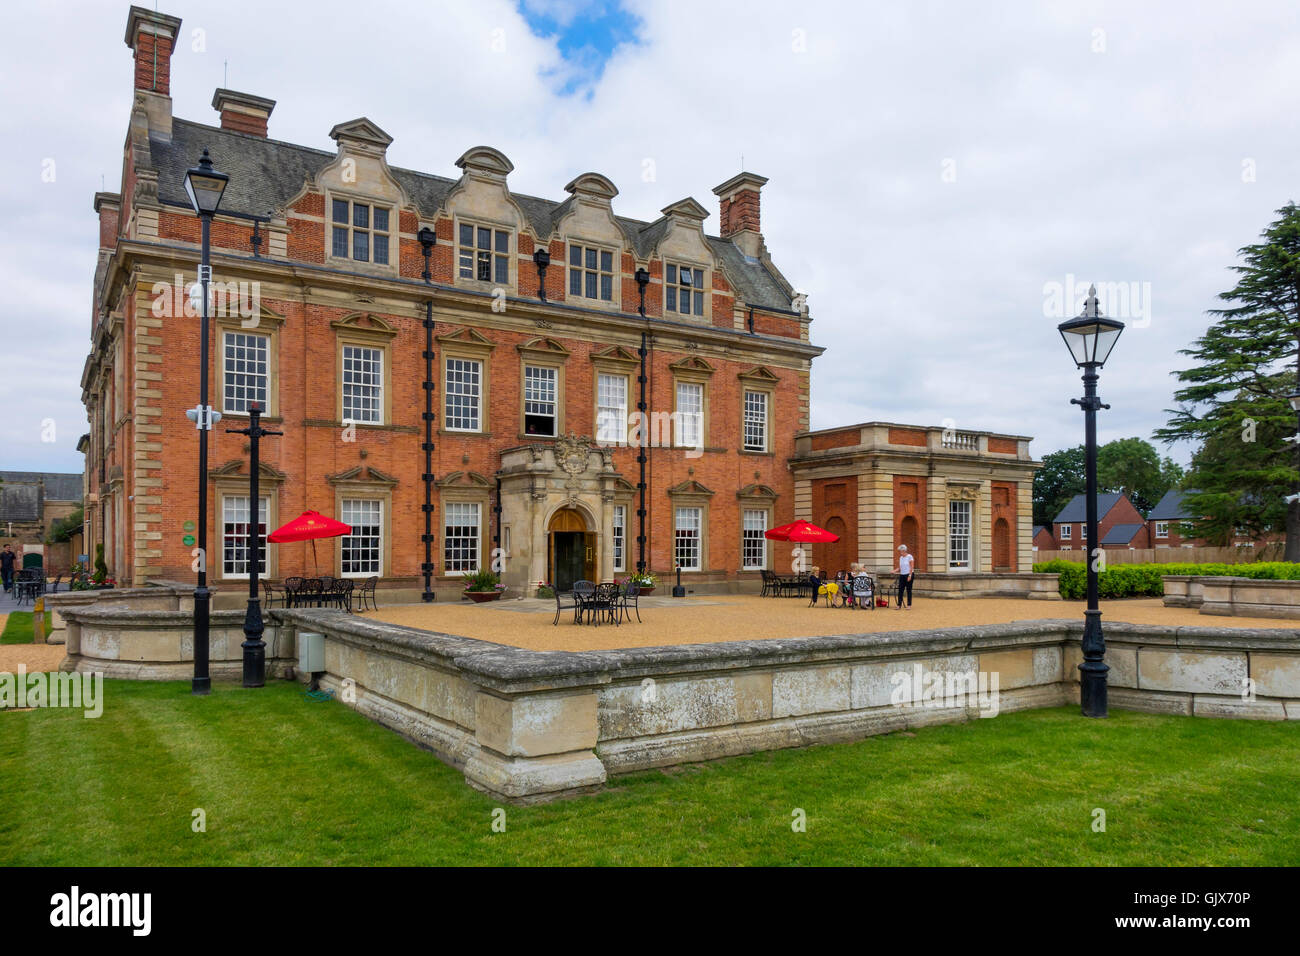 Acklam Hall Middlesbrough built 1678 restored 2016 after being used as a school since 1936 now Restaurant and Conference Centre Stock Photo